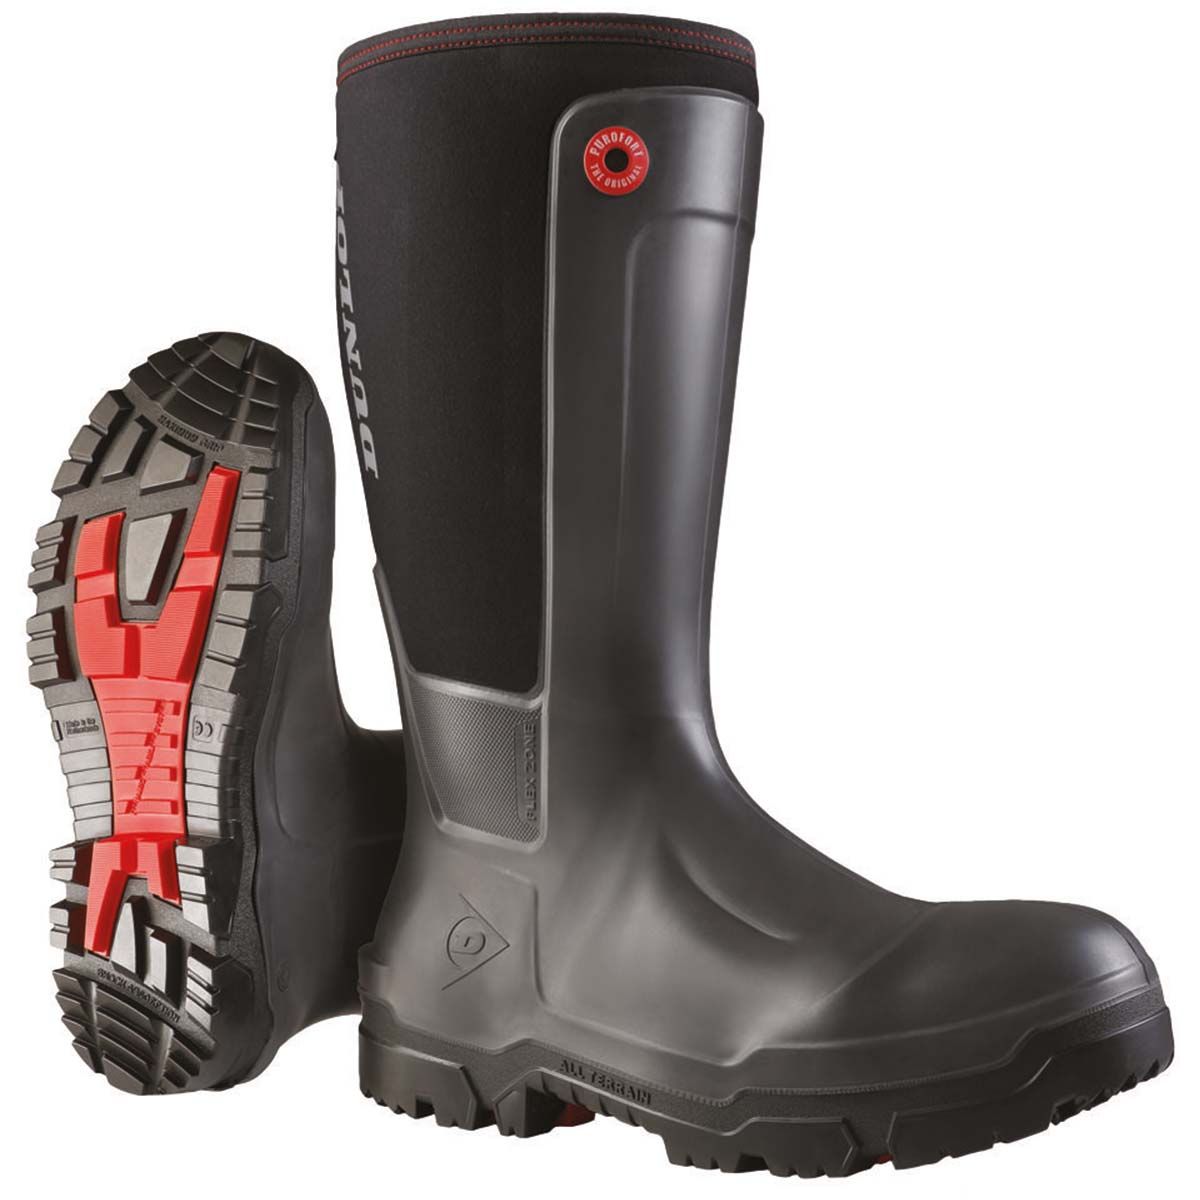 Dunlop Snugboot WorkPro Full Safety gumicsizma